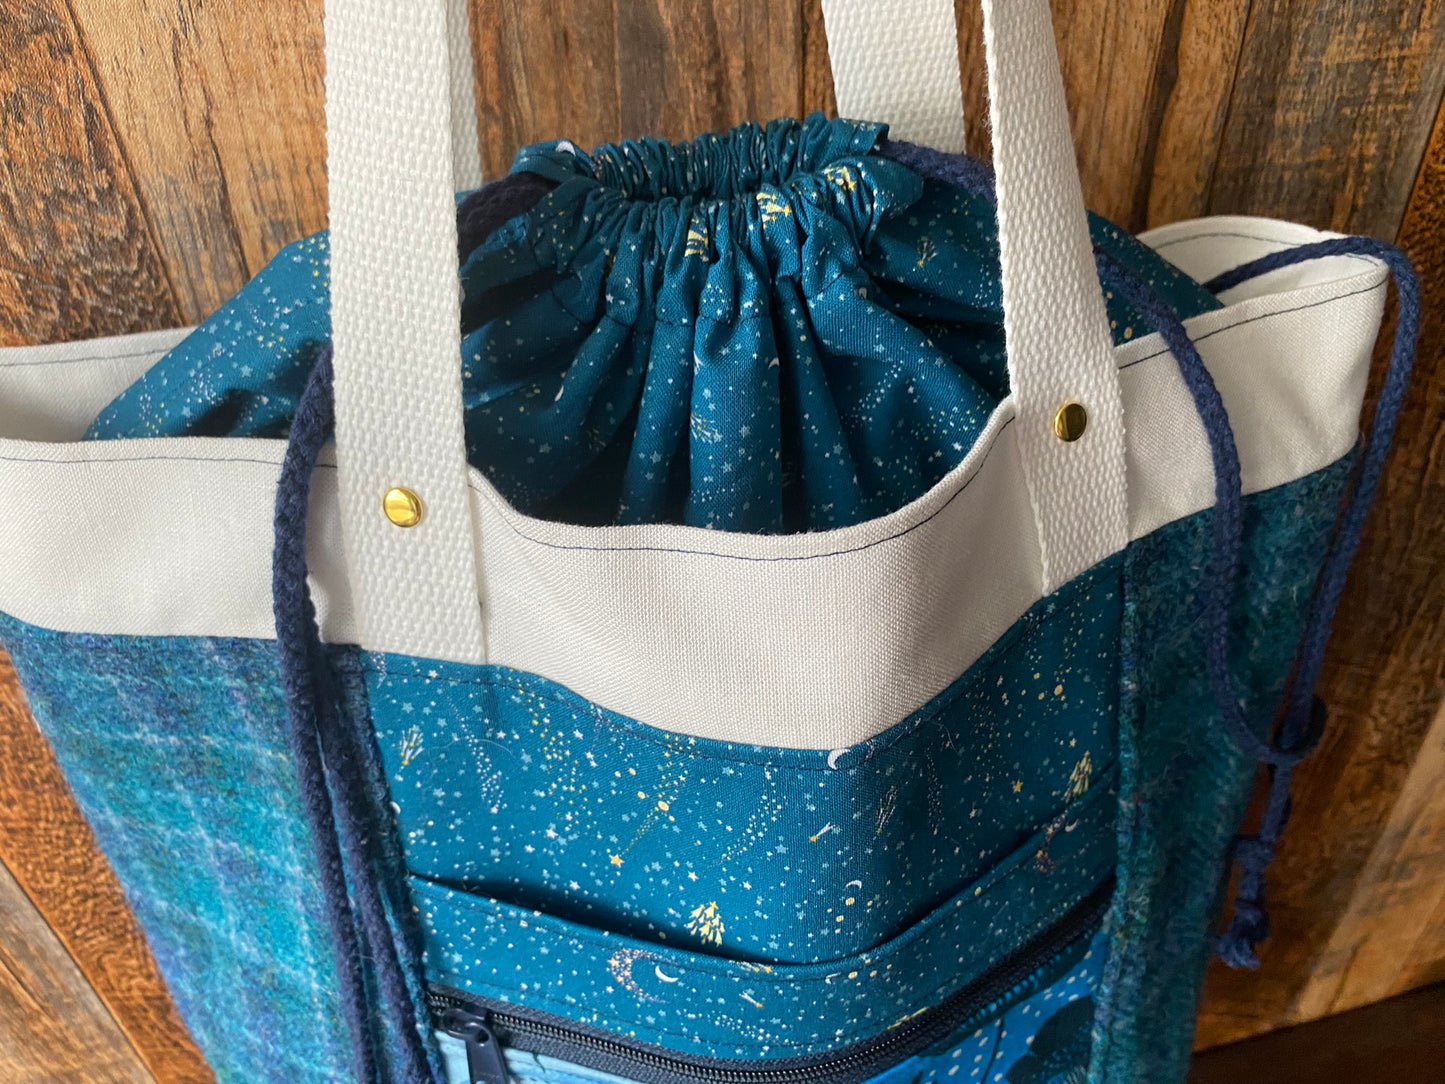 Harris Tweed and Owl/Bear Large Firefly Project Bag